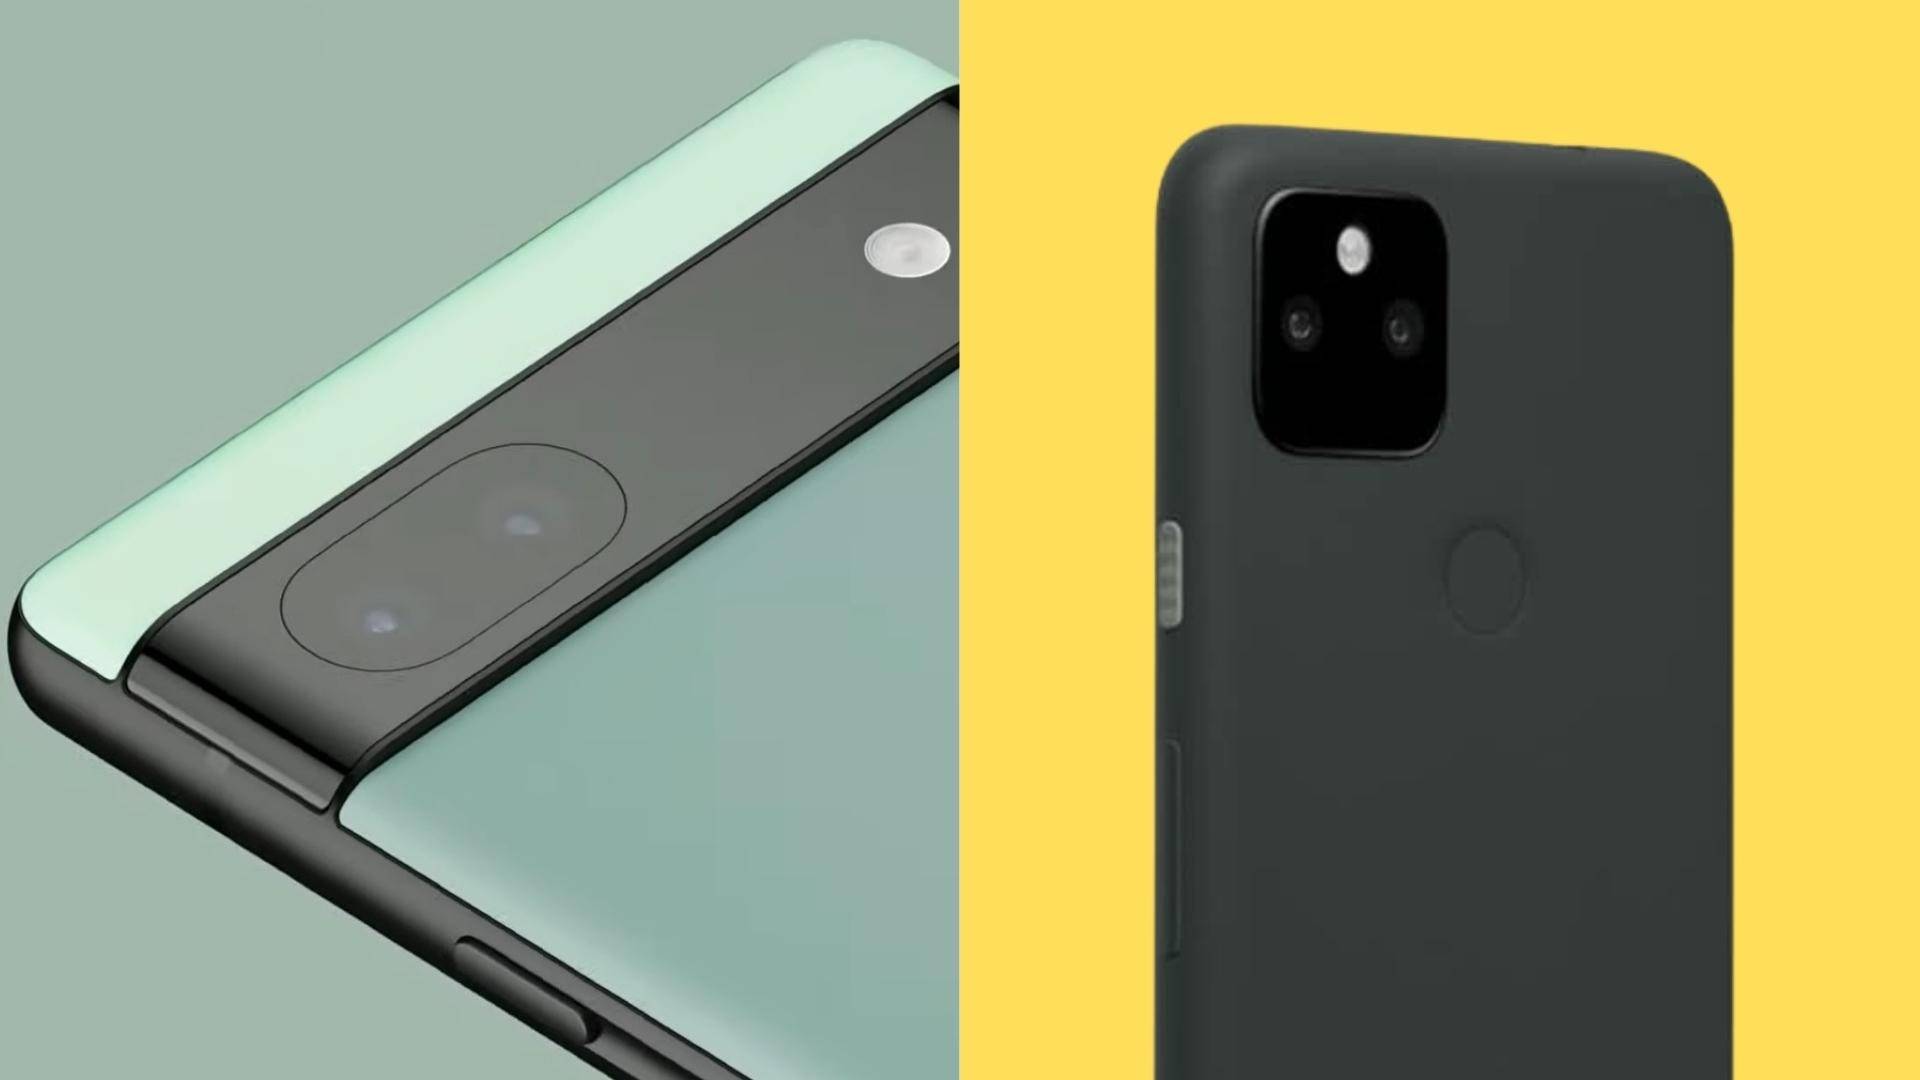 camera array's on Pixel 6a and Pixel 5a